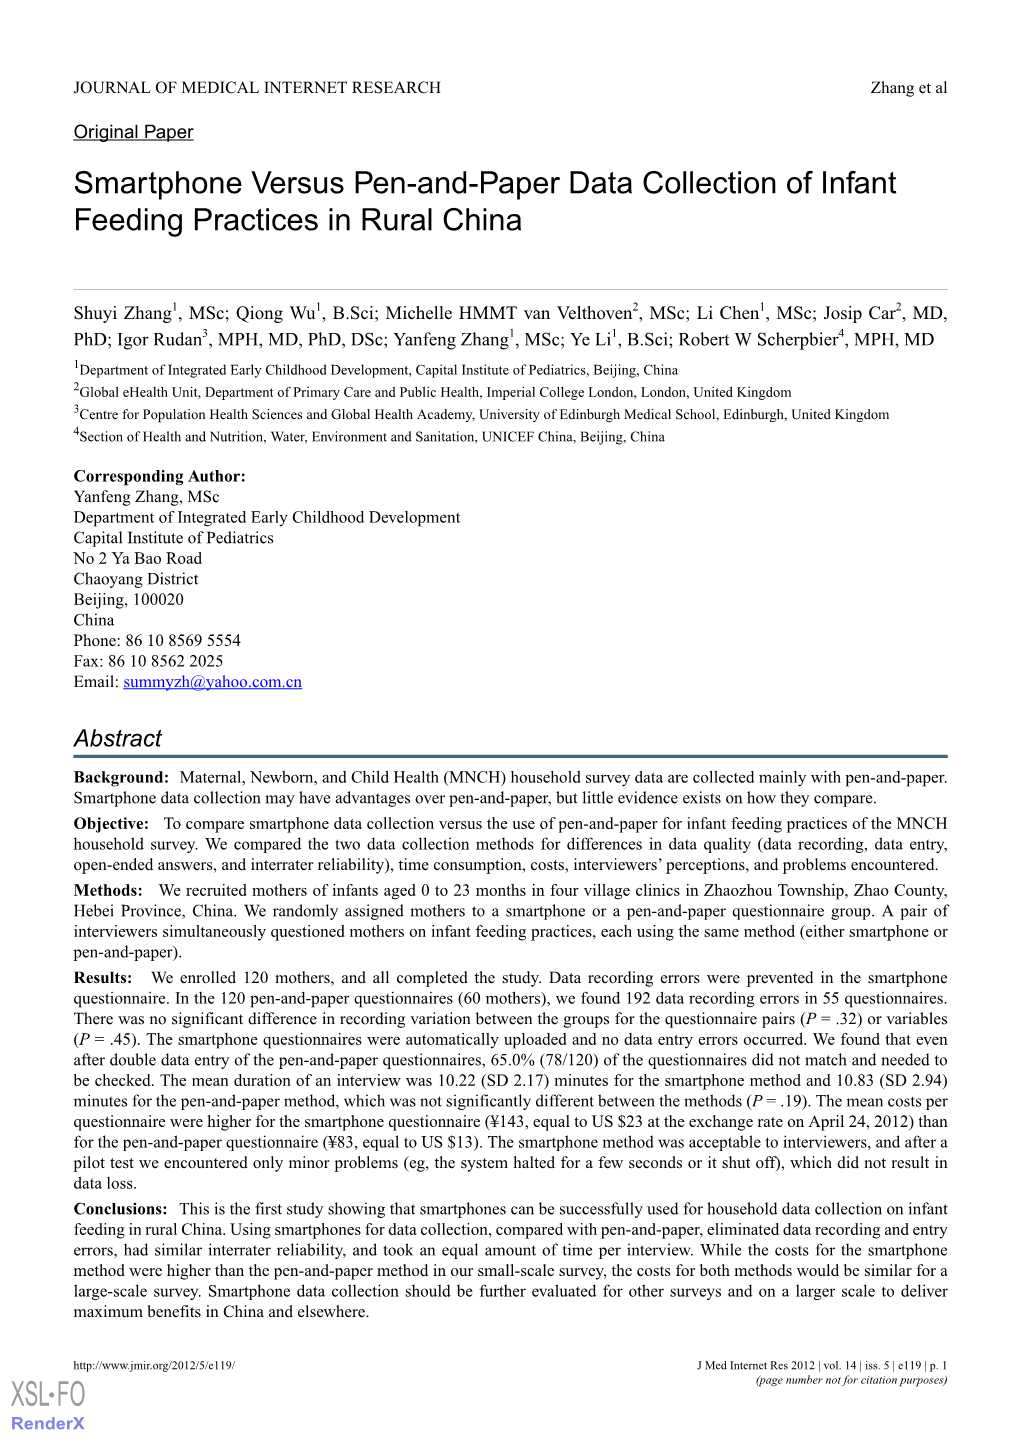 Smartphone Versus Pen-And-Paper Data Collection of Infant Feeding Practices in Rural China